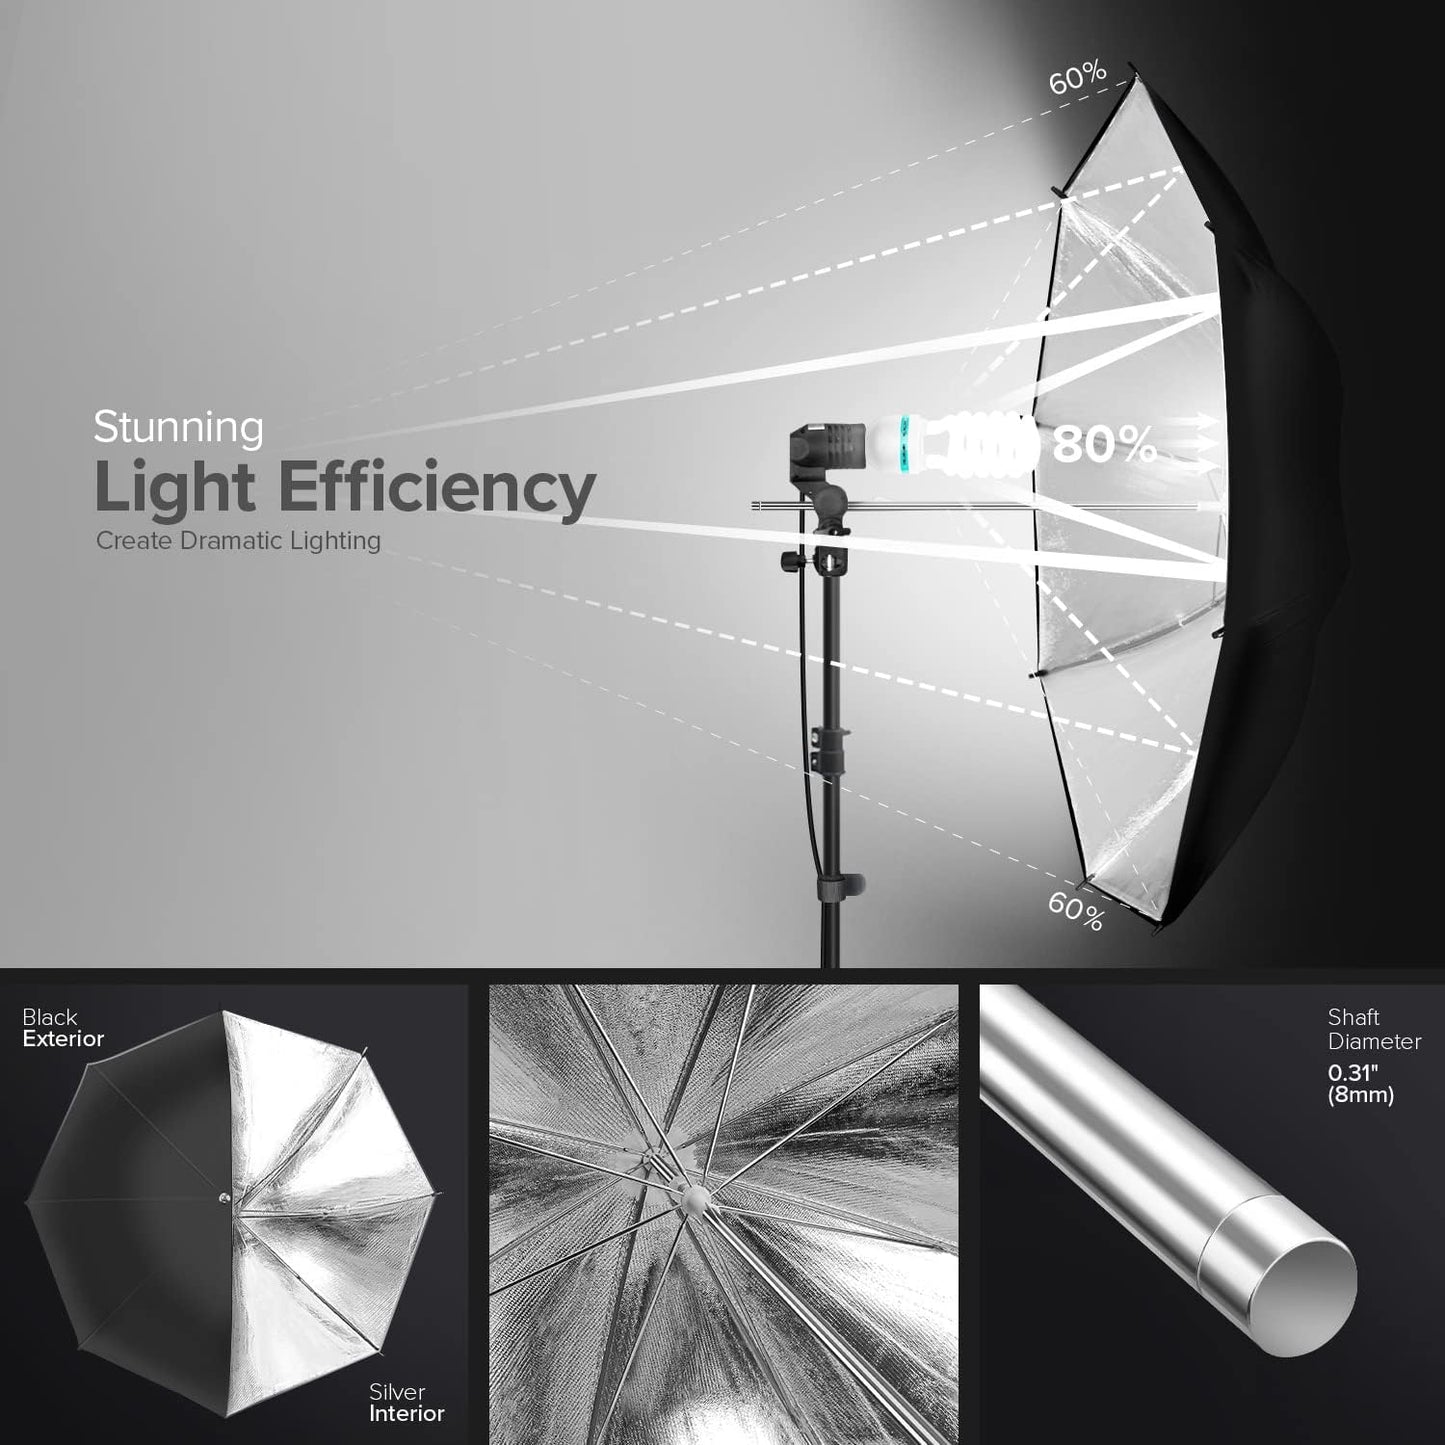 700W Output Lighting Series, Soft Continuous Lighting Kit